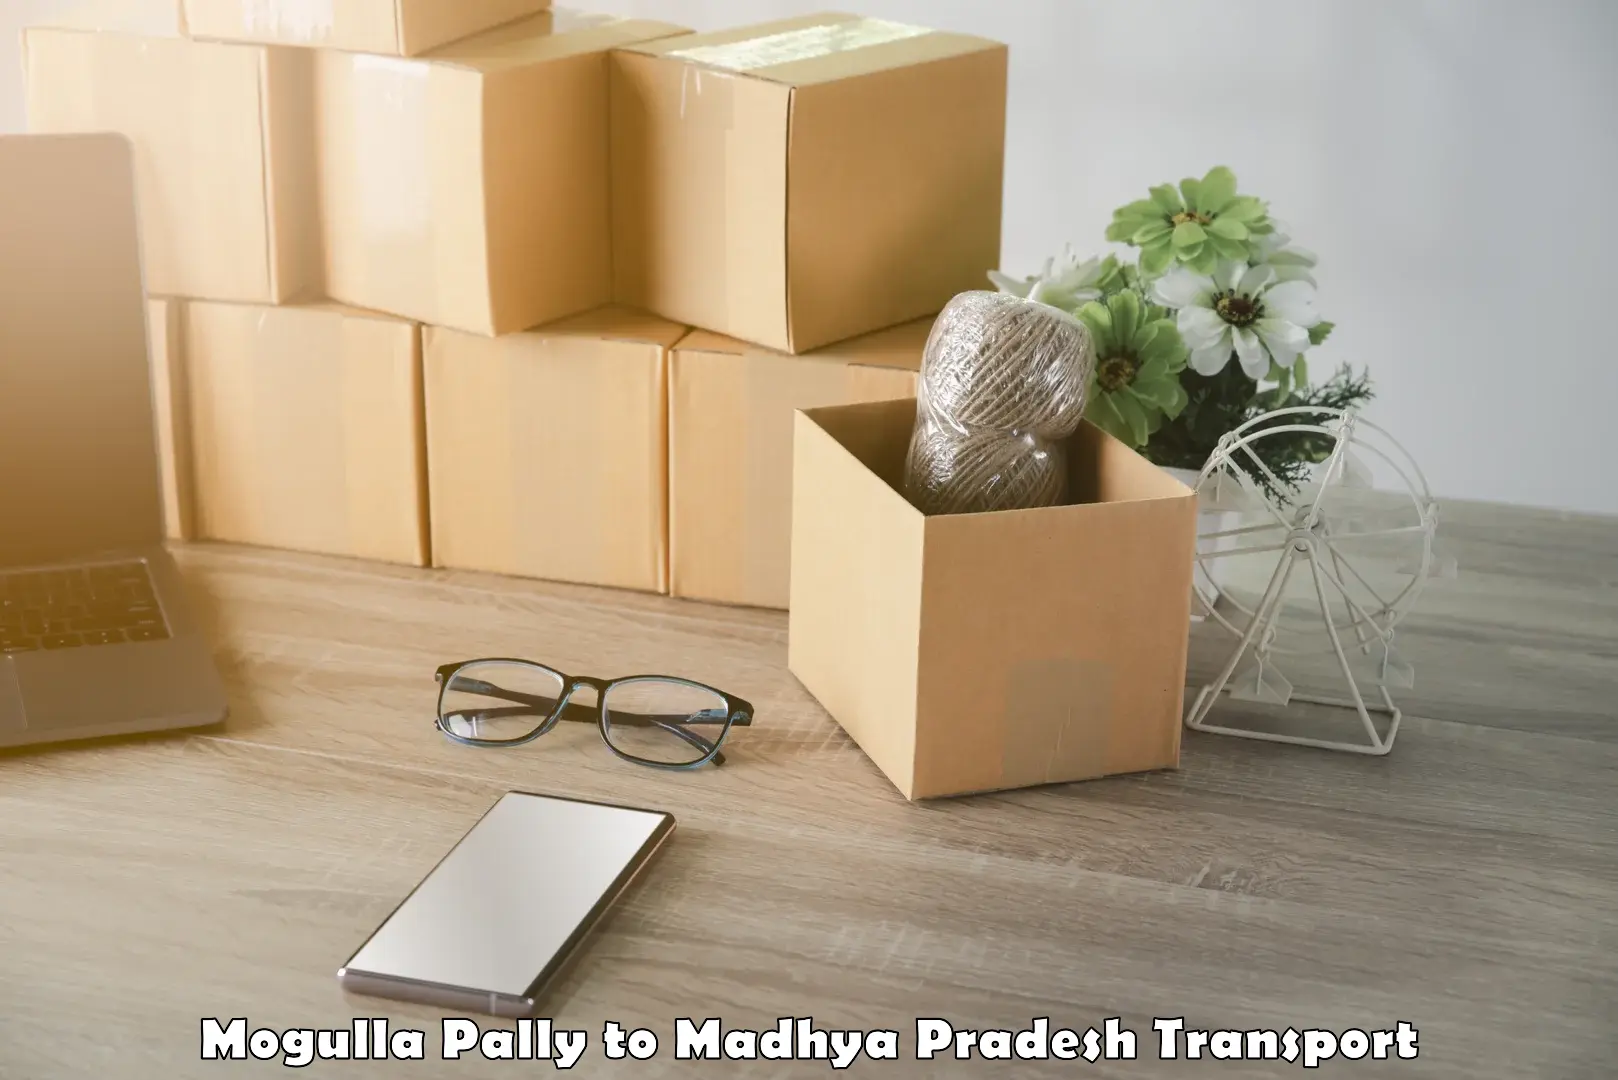 Commercial transport service in Mogulla Pally to Indore